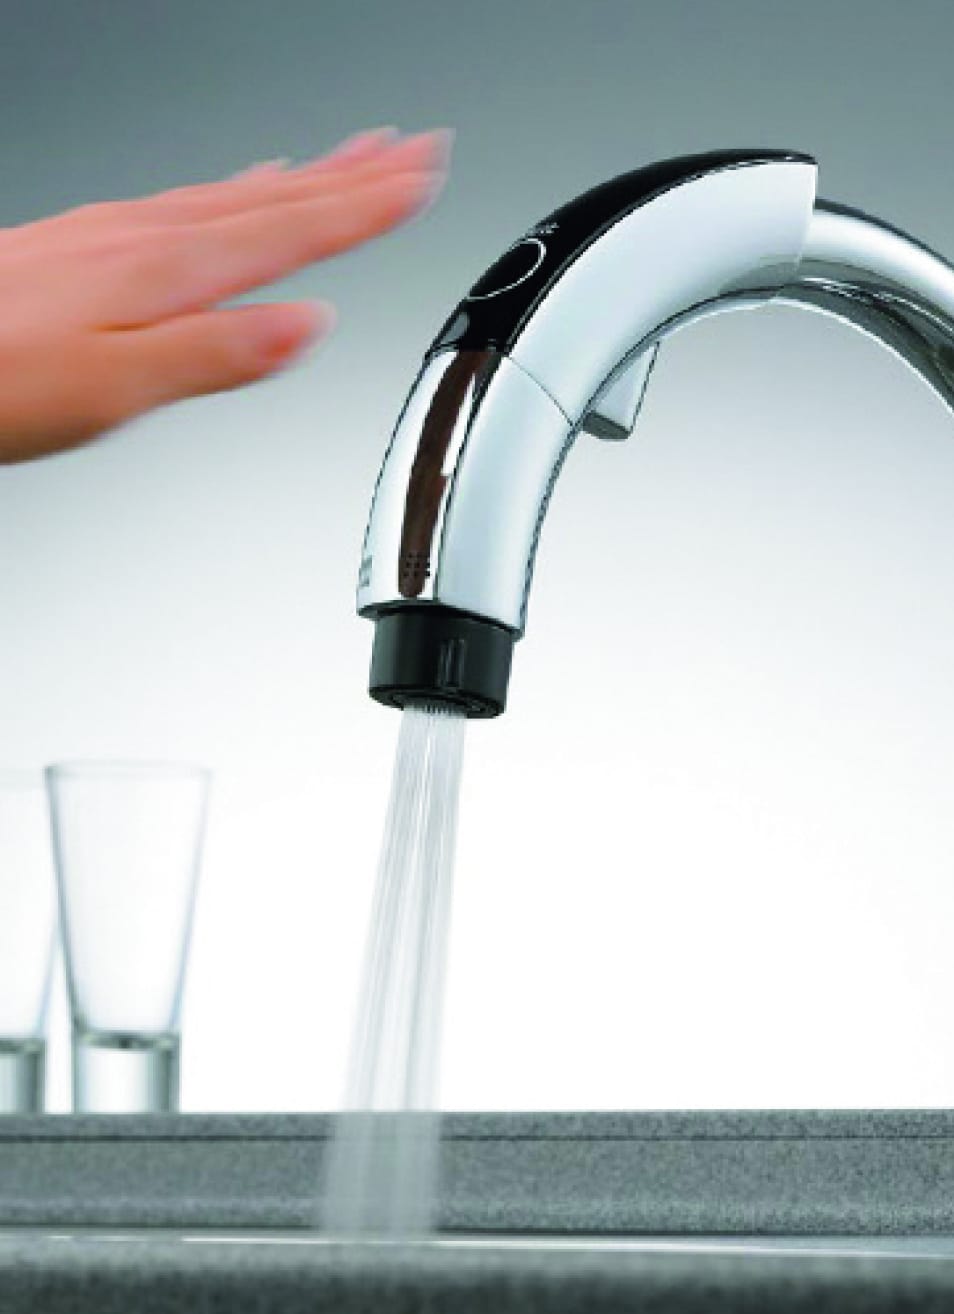 Launch of touchless faucet that supplies water by sensor technology.